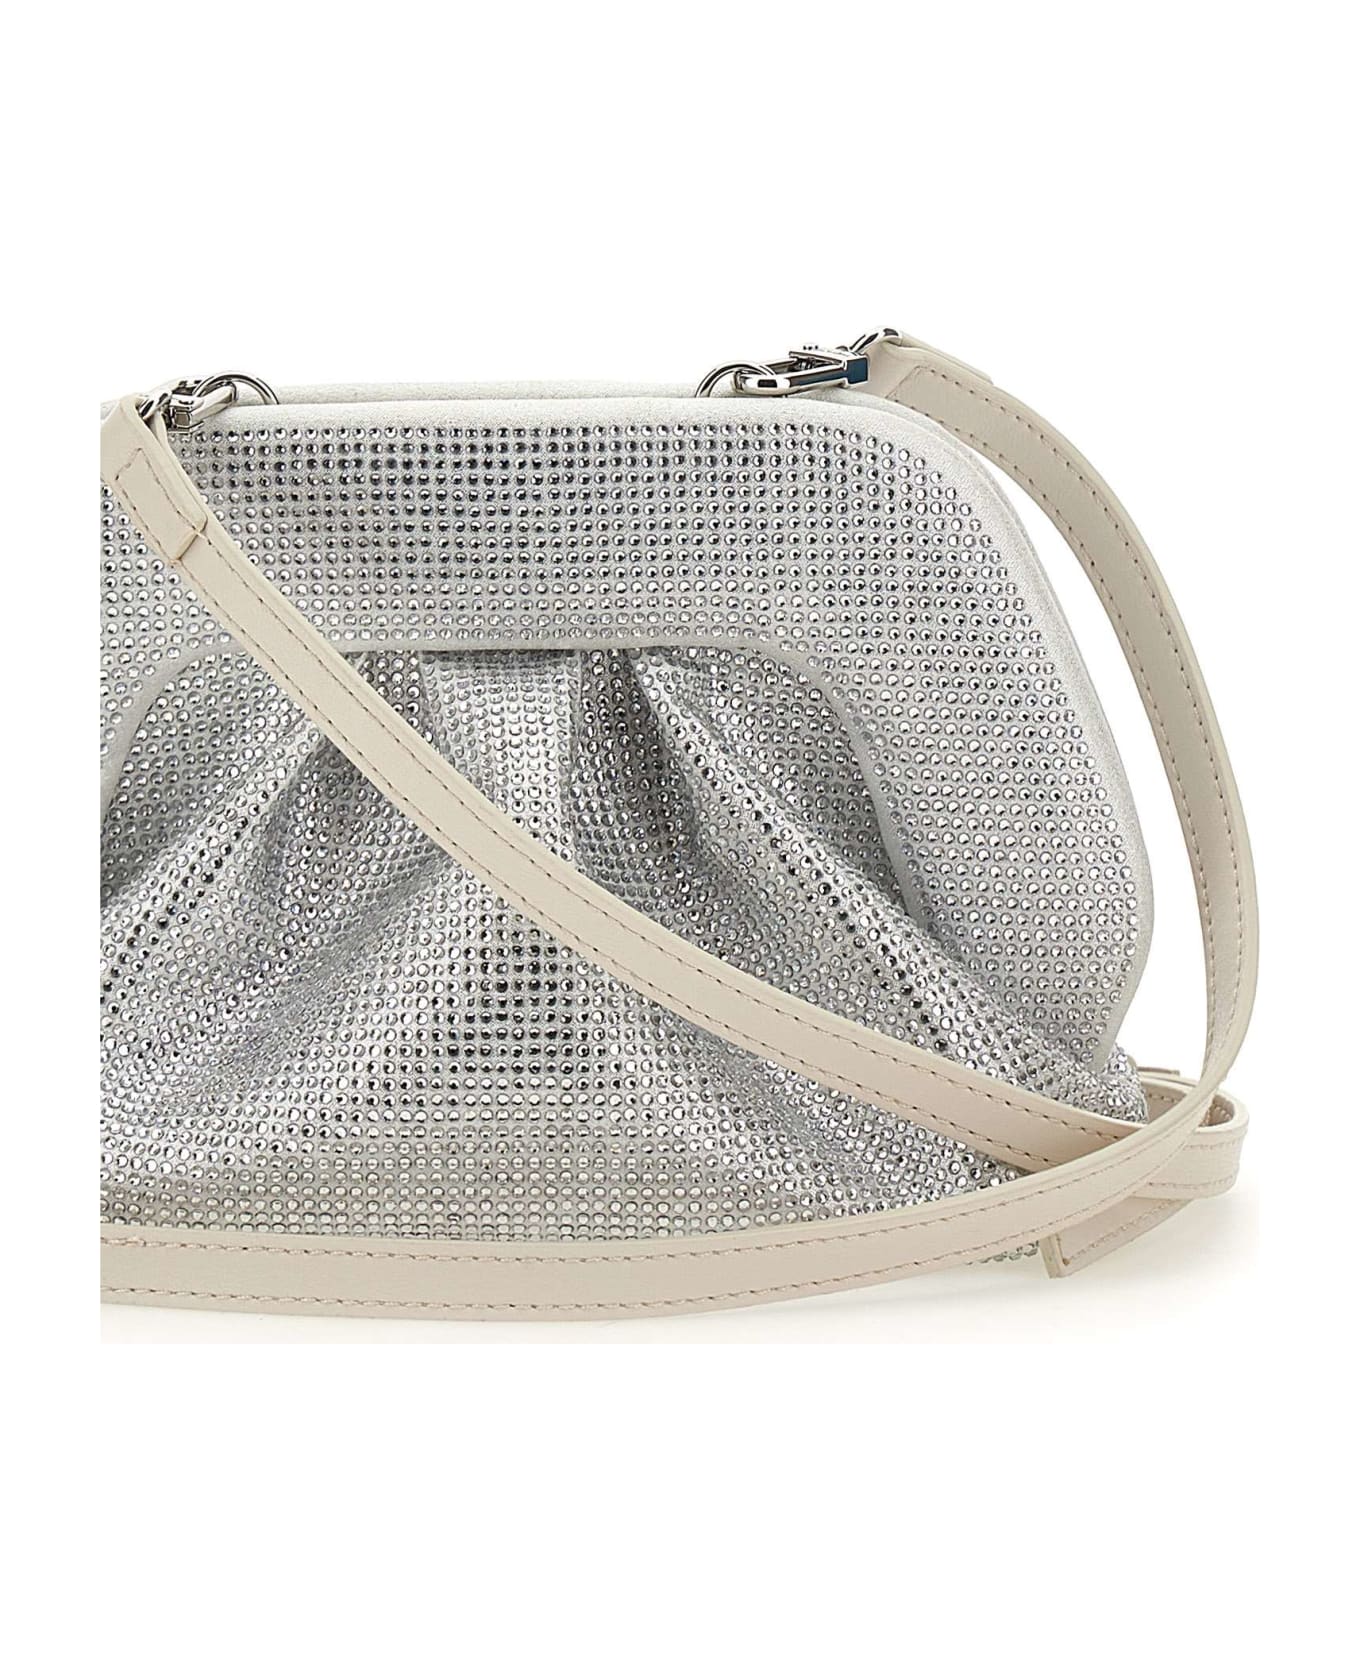 THEMOIRè "gea Strass" Vegan Leather Clutch Bag - SILVER クラッチバッグ